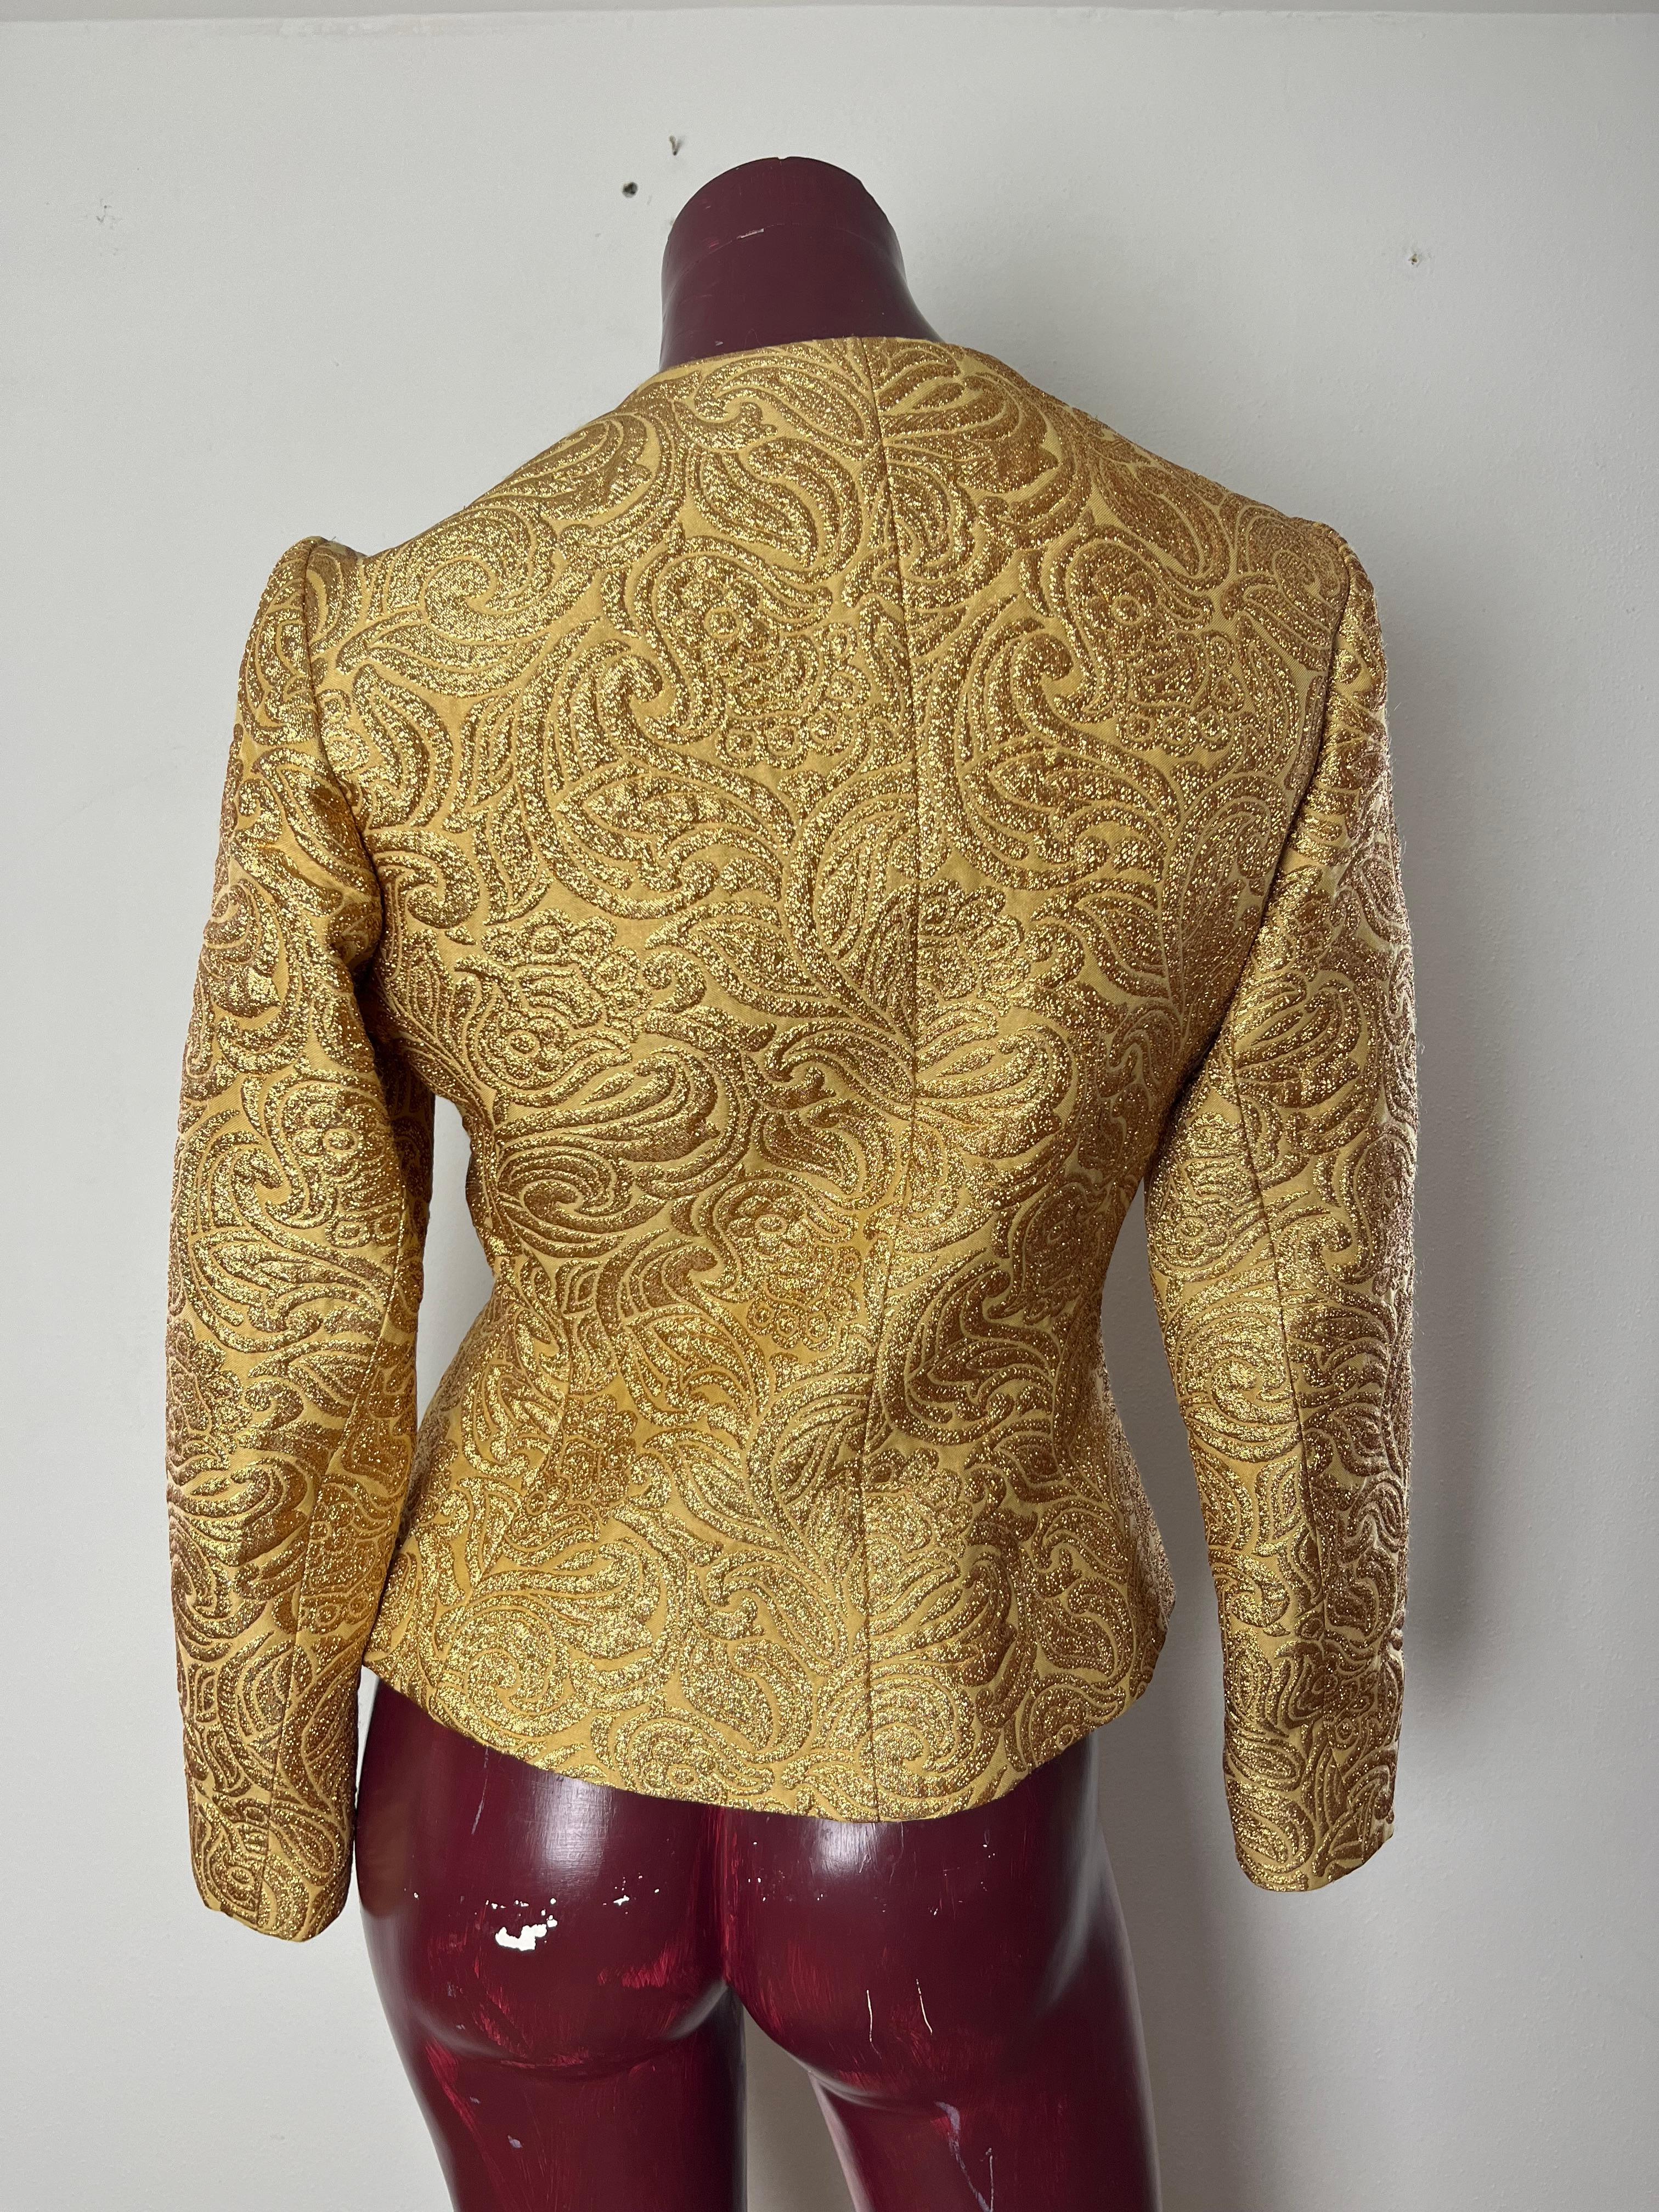 YSL gold brocade suit For Sale 8